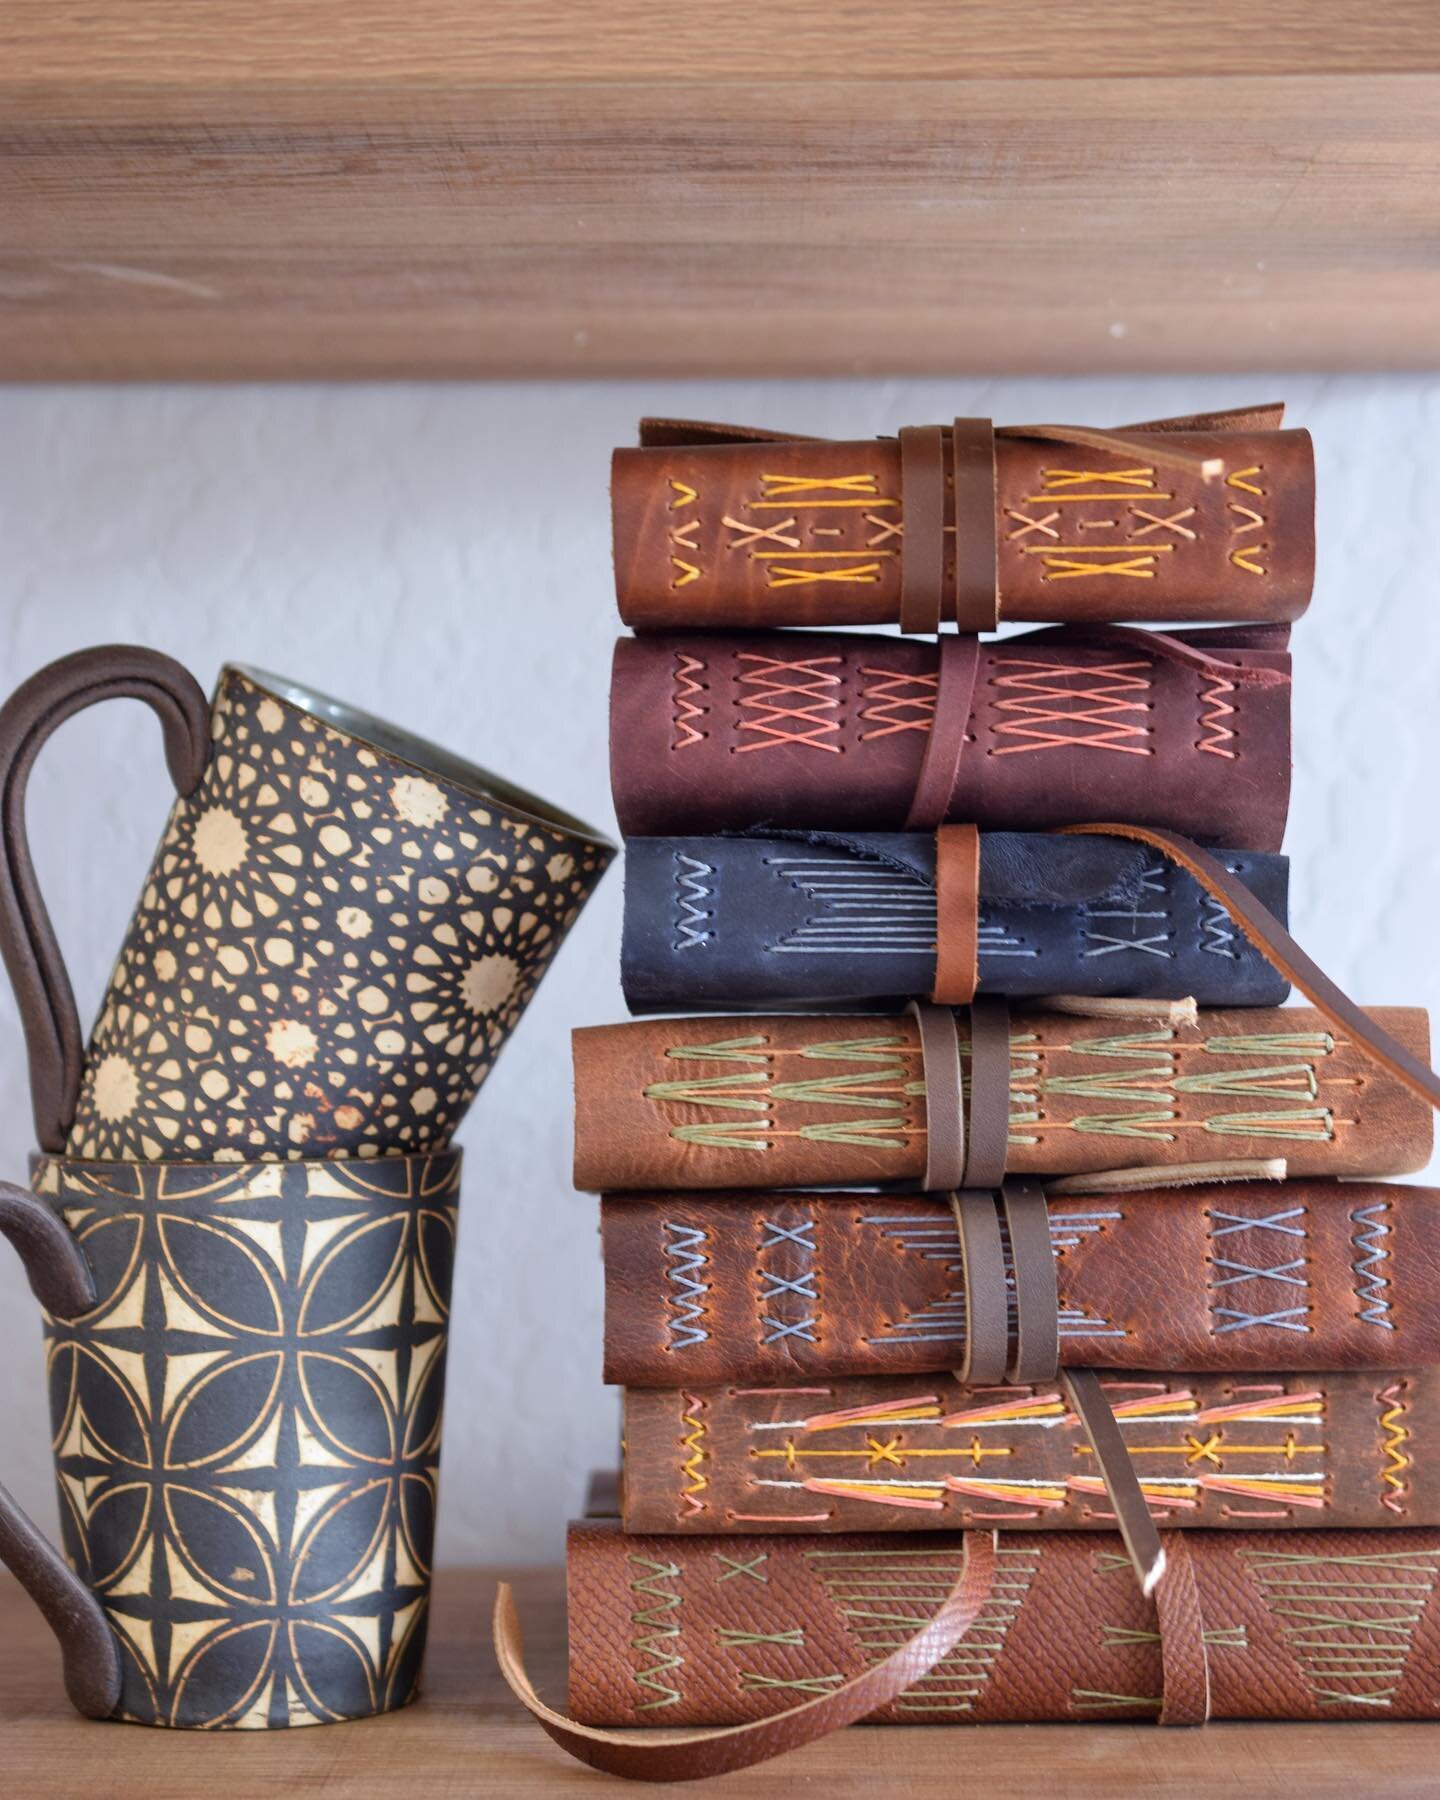 Having a sweet little storefront is the greatest. We&rsquo;re at the shop most days and would love to show you around. These books are also now on my website! #leatherlongstitch #leatherjournals #quillandarrow #petaluma